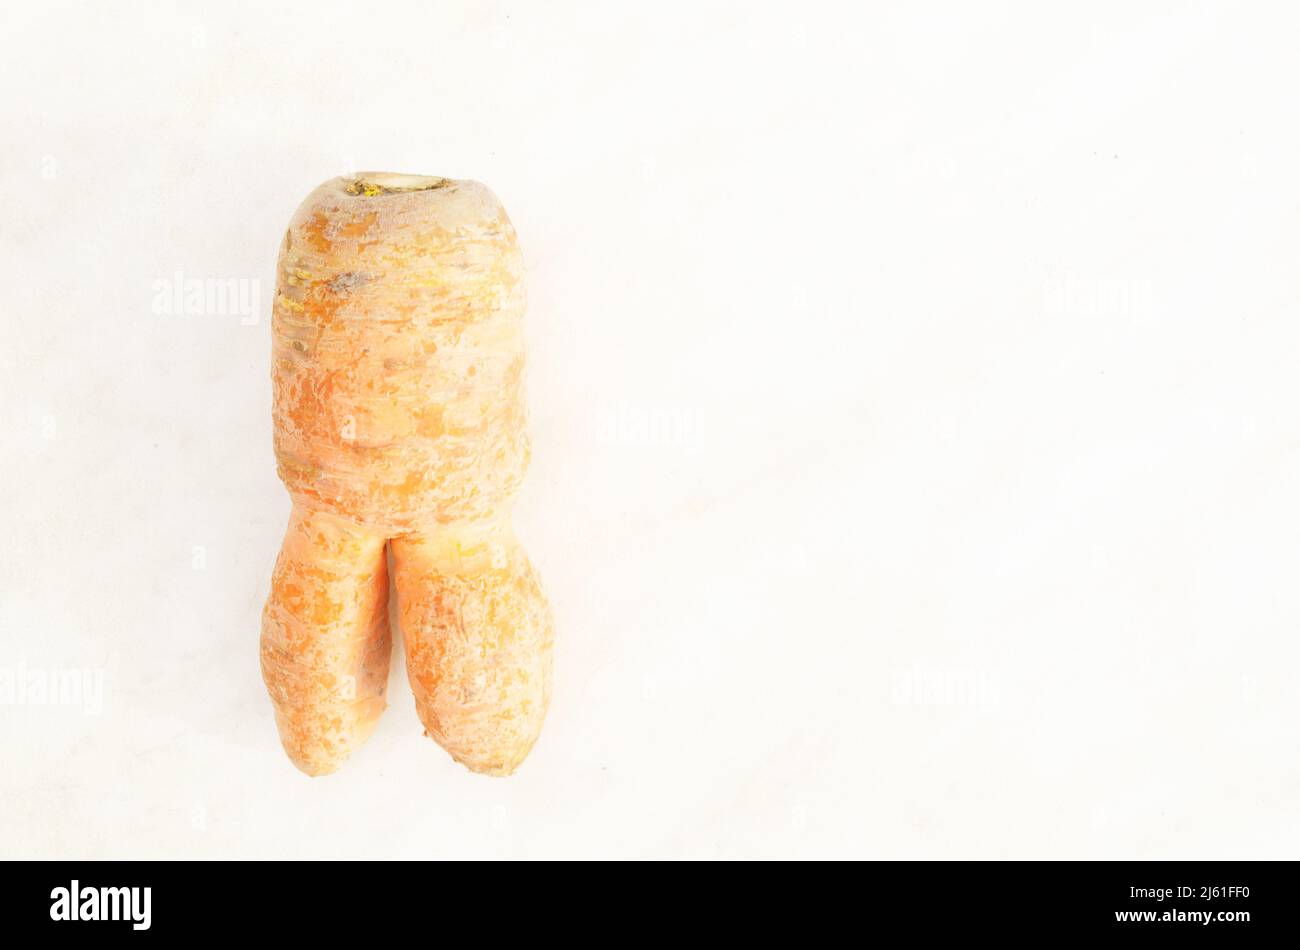 Ugly carrot in in the shape of a little man on white background.Funny, unnormal vegetable or food waste concept. Stock Photo